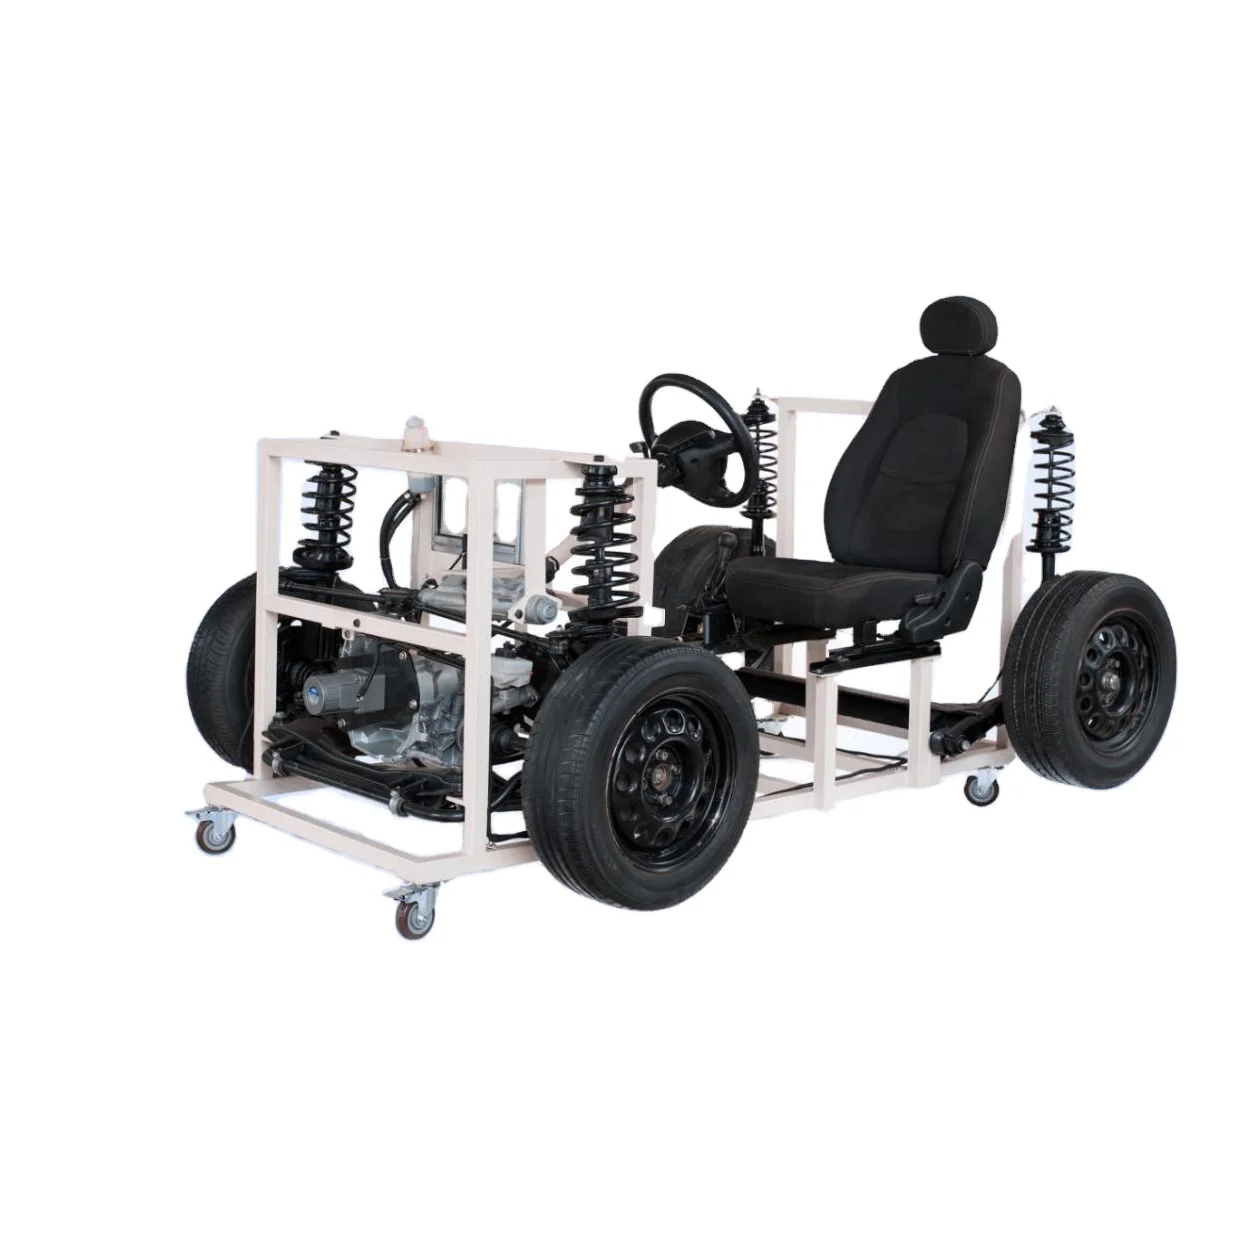 Chassis systems